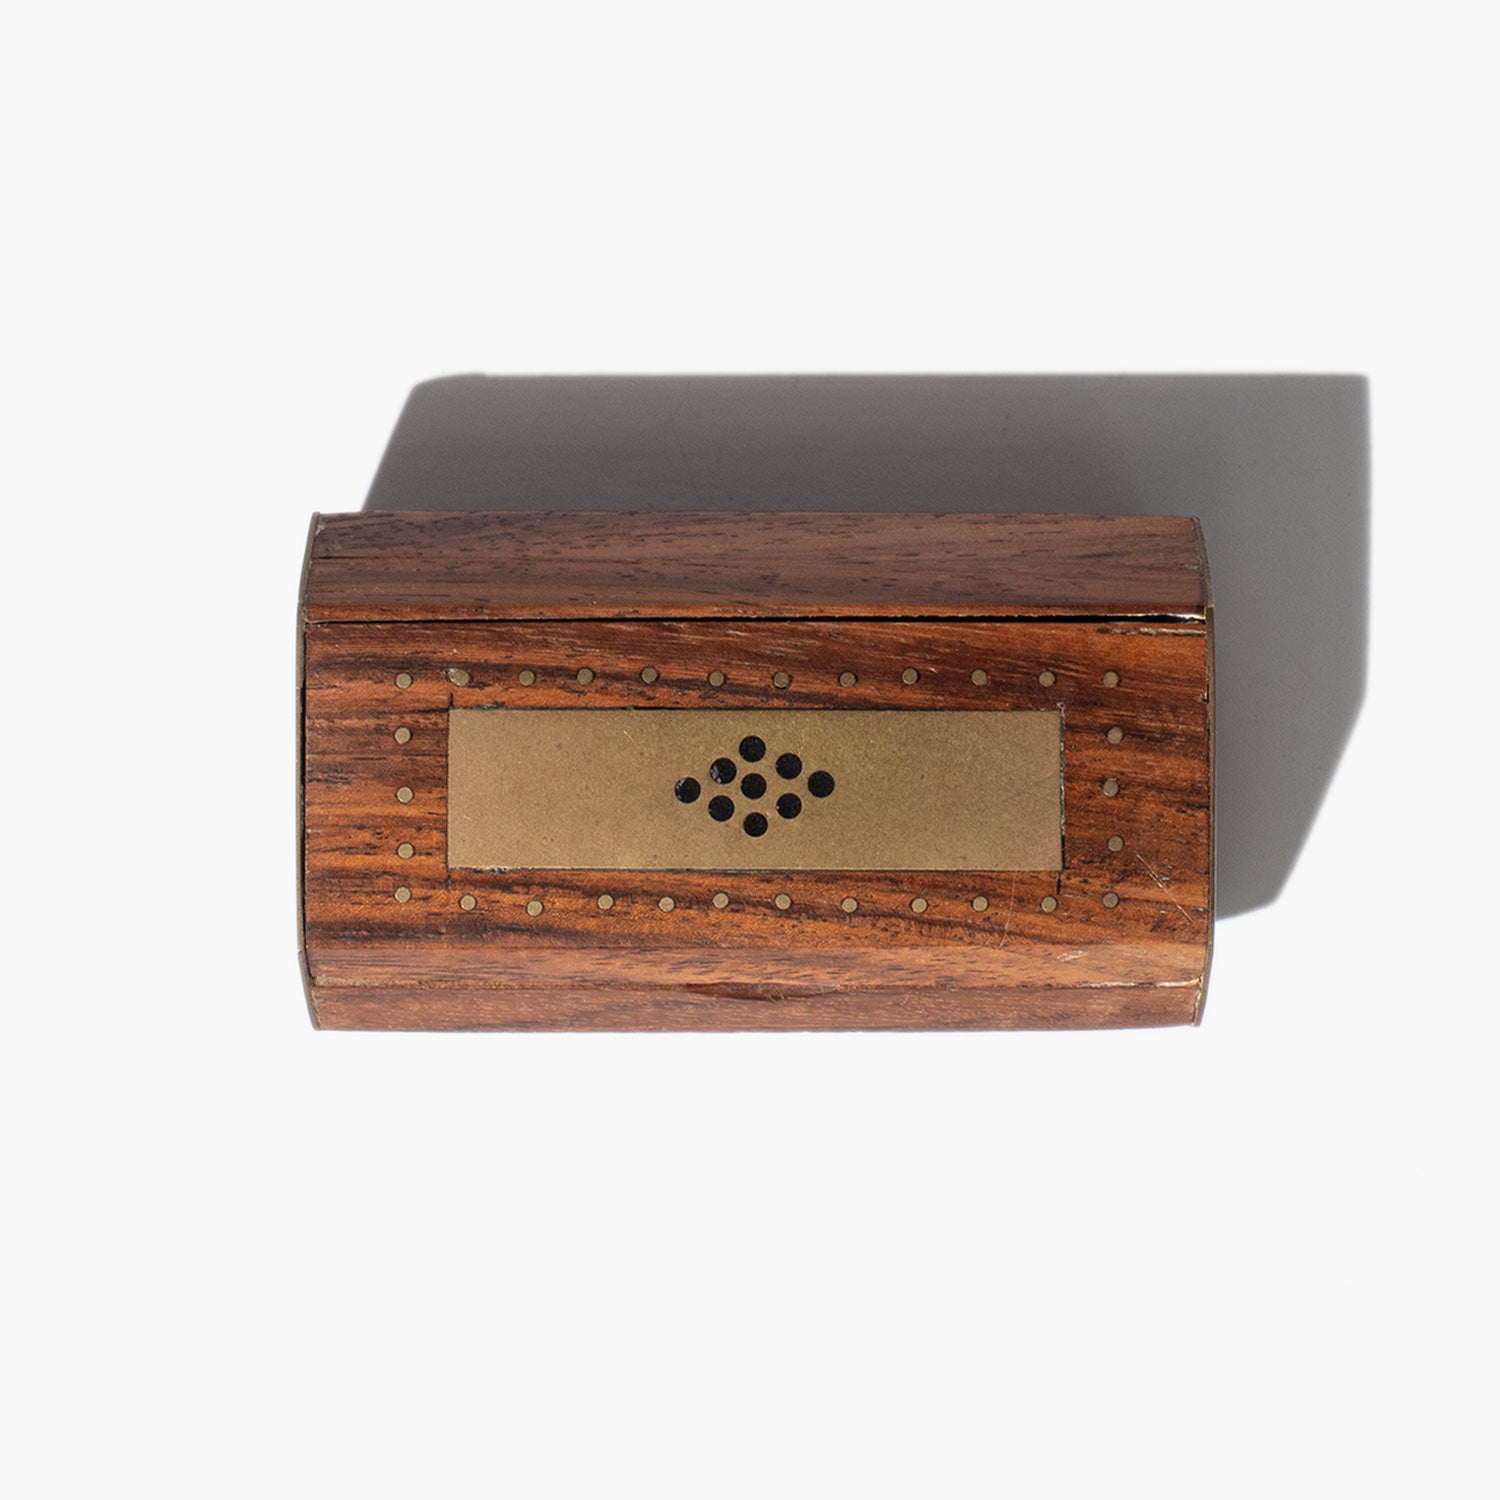 Wooden Box with Brass Detailing